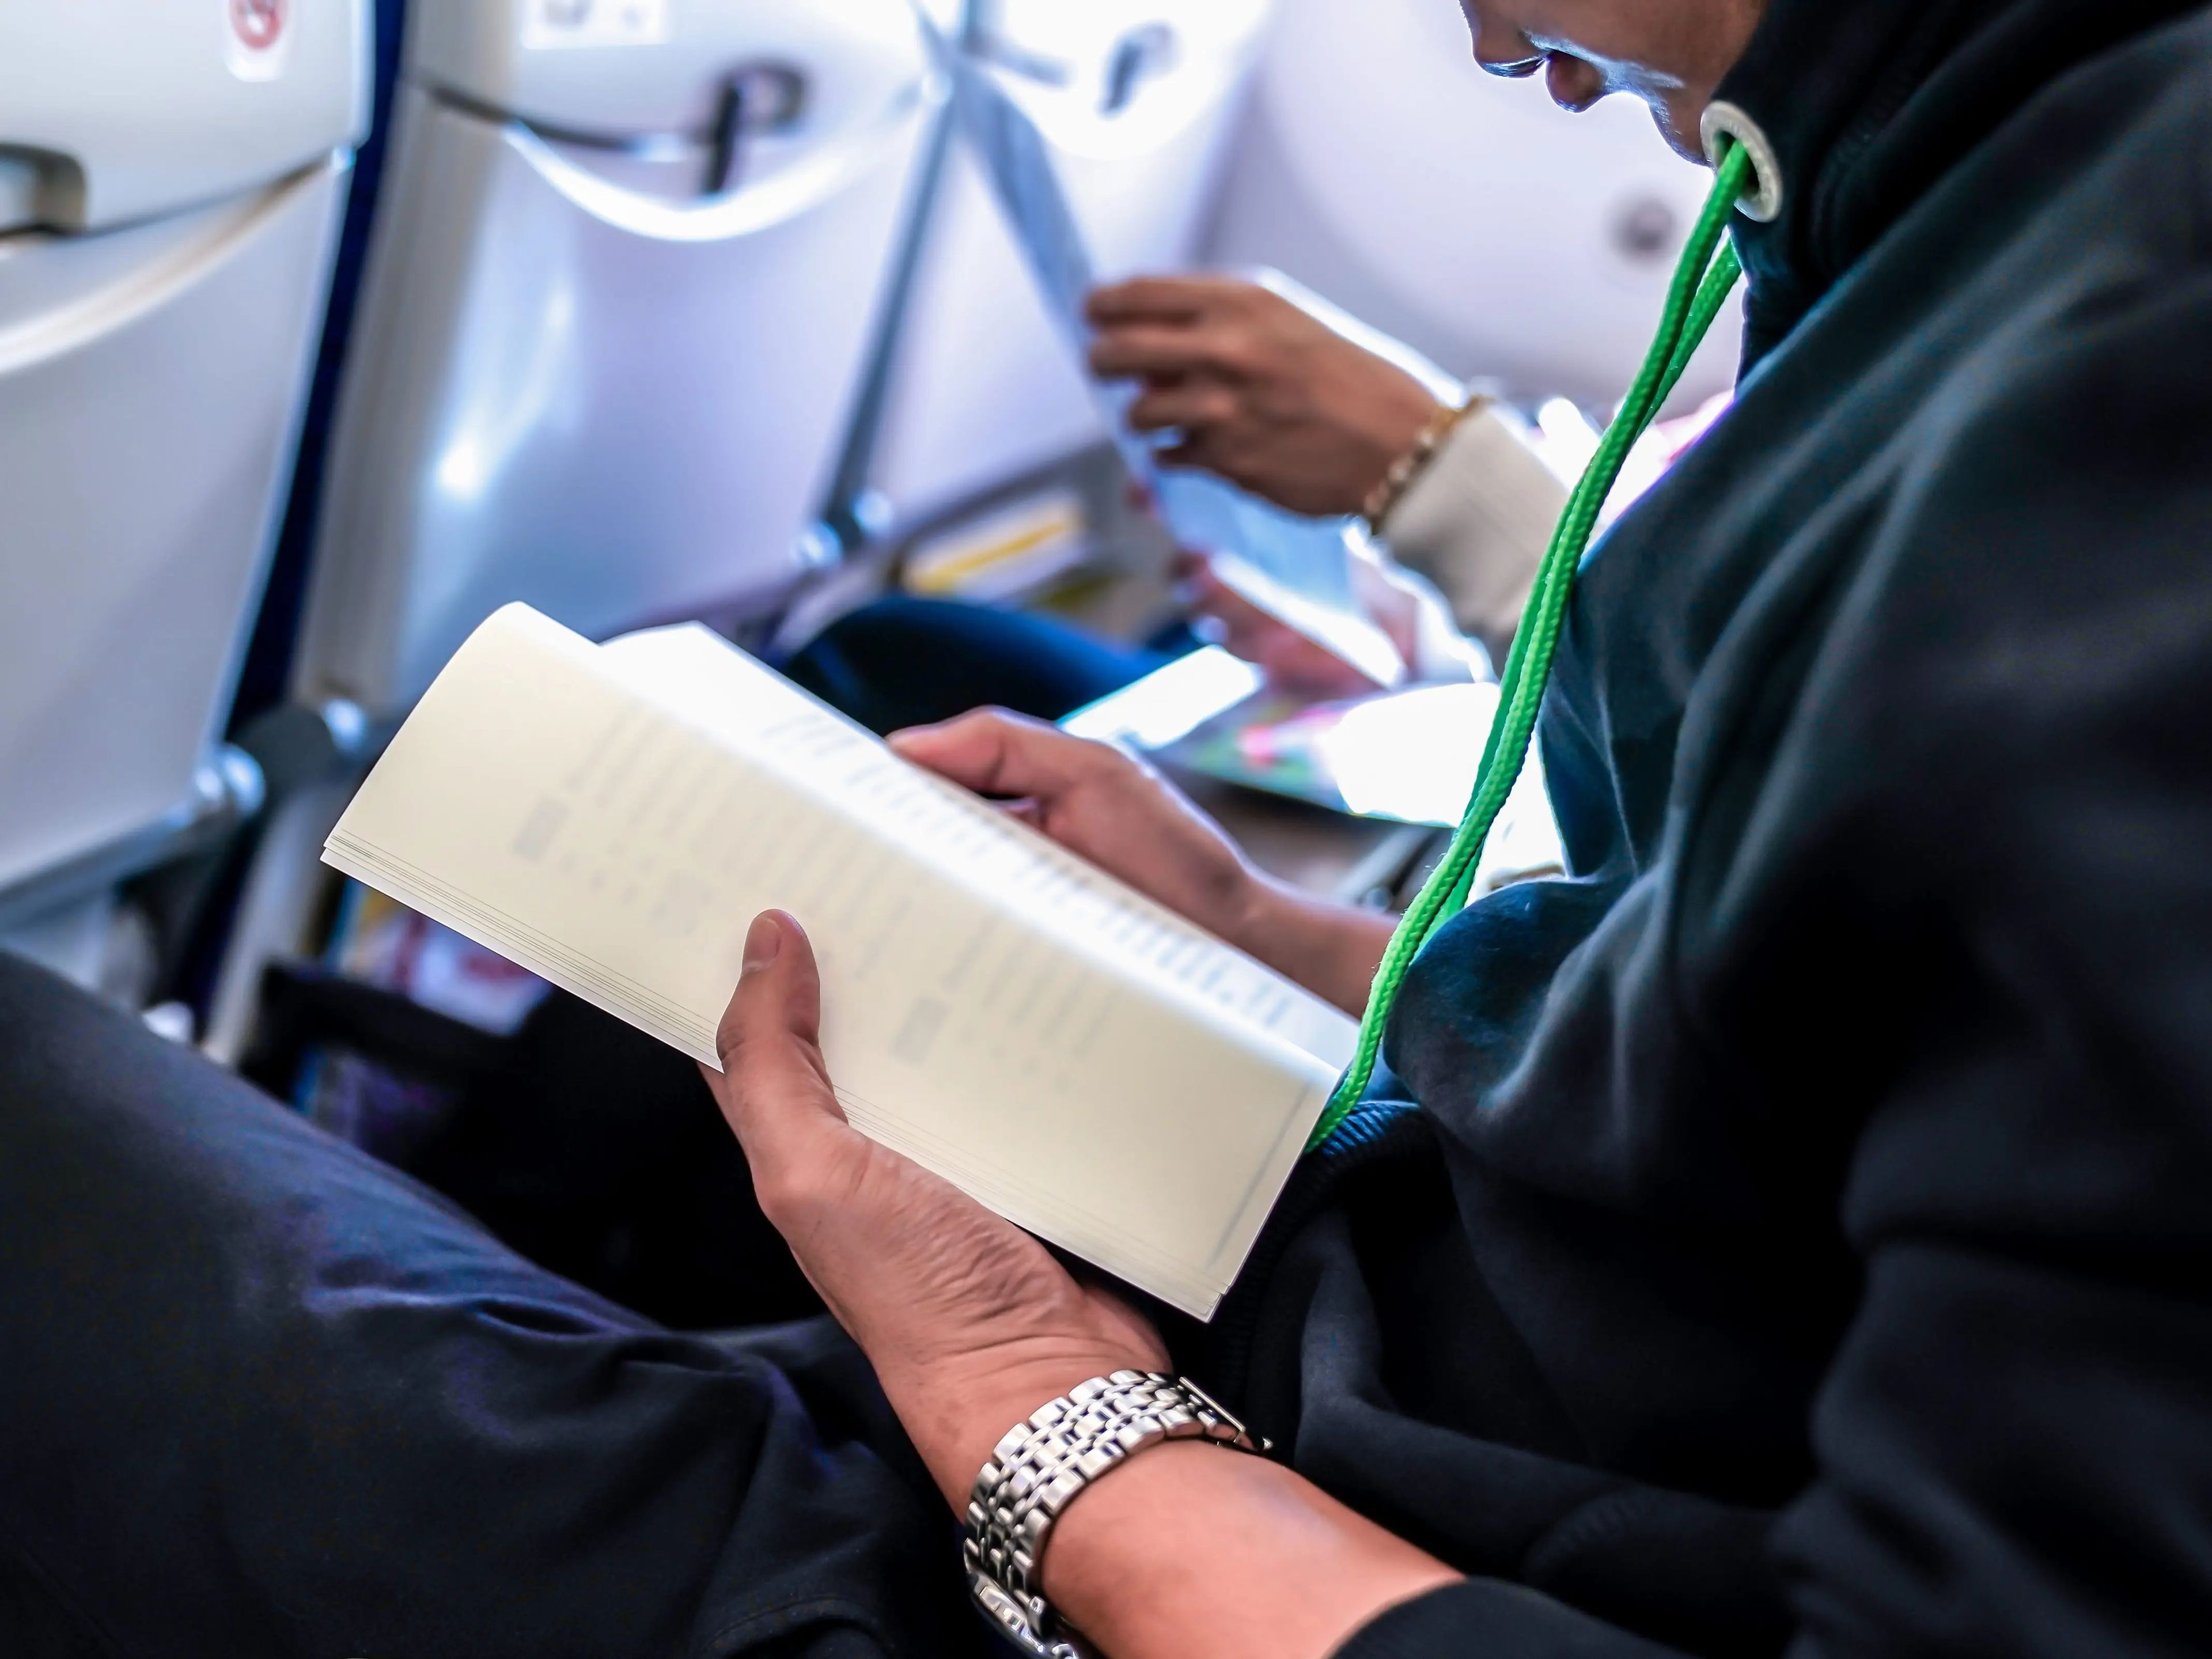 A man reading a book on a plane